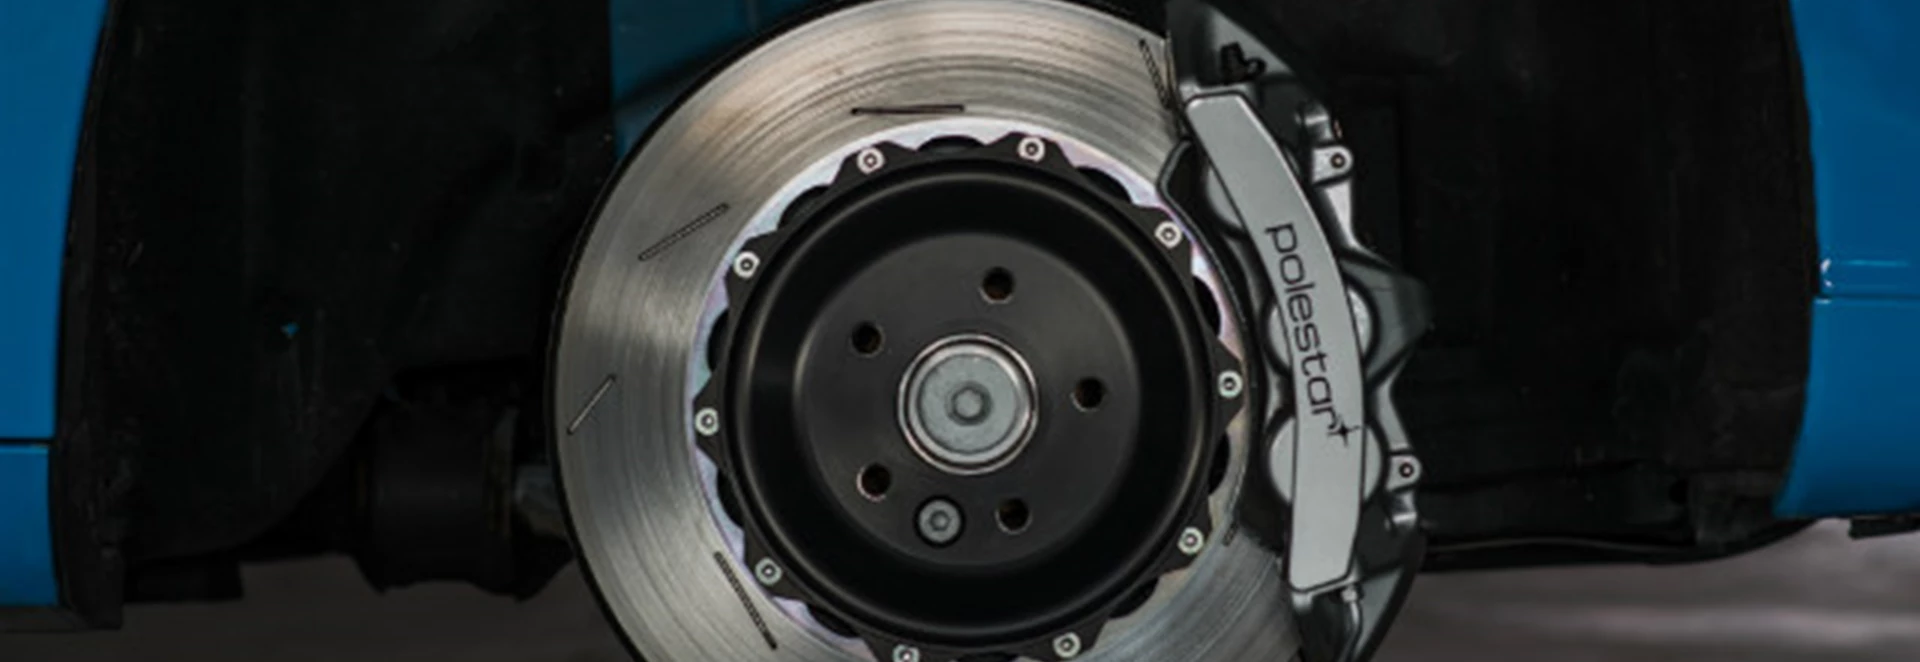 Disc brakes and drum brakes explained 